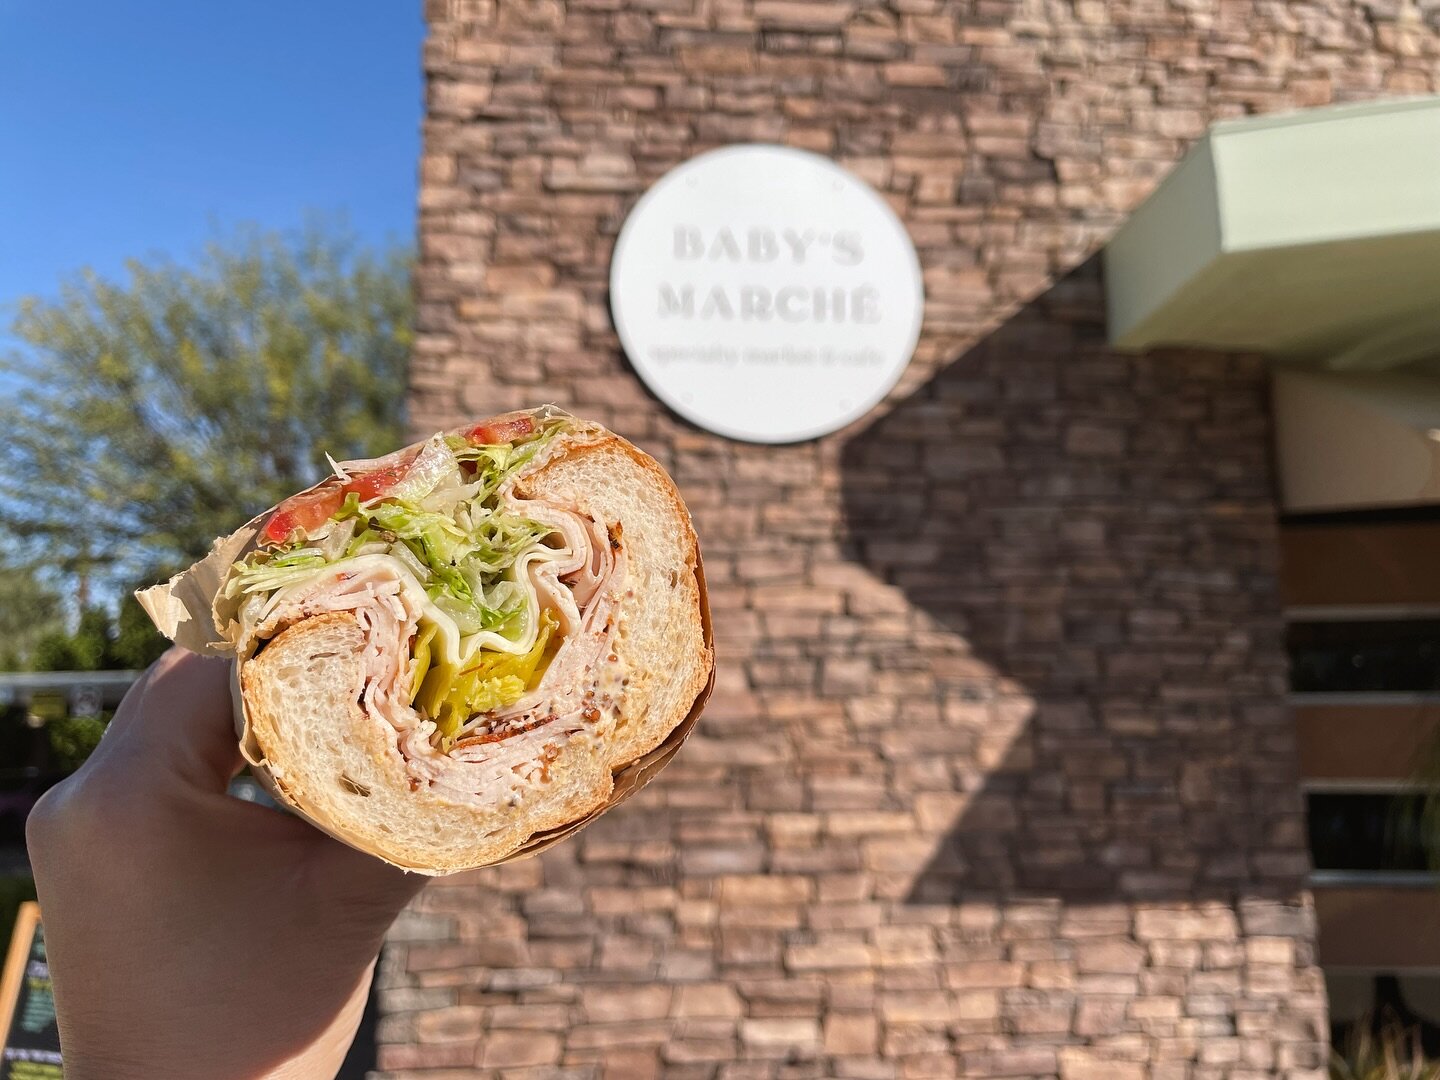 Spotlight on Johanna&rsquo;s favorite sandwich, The Turkey! 

Blackened turkey 
Provolone cheese 
Banana Peppers 
Dressed iceberg lettuce 
Sweet onion 
Roma tomatoes 
House made deli mustard 

We want to hear what your favorite Baby&rsquo;s March&eac